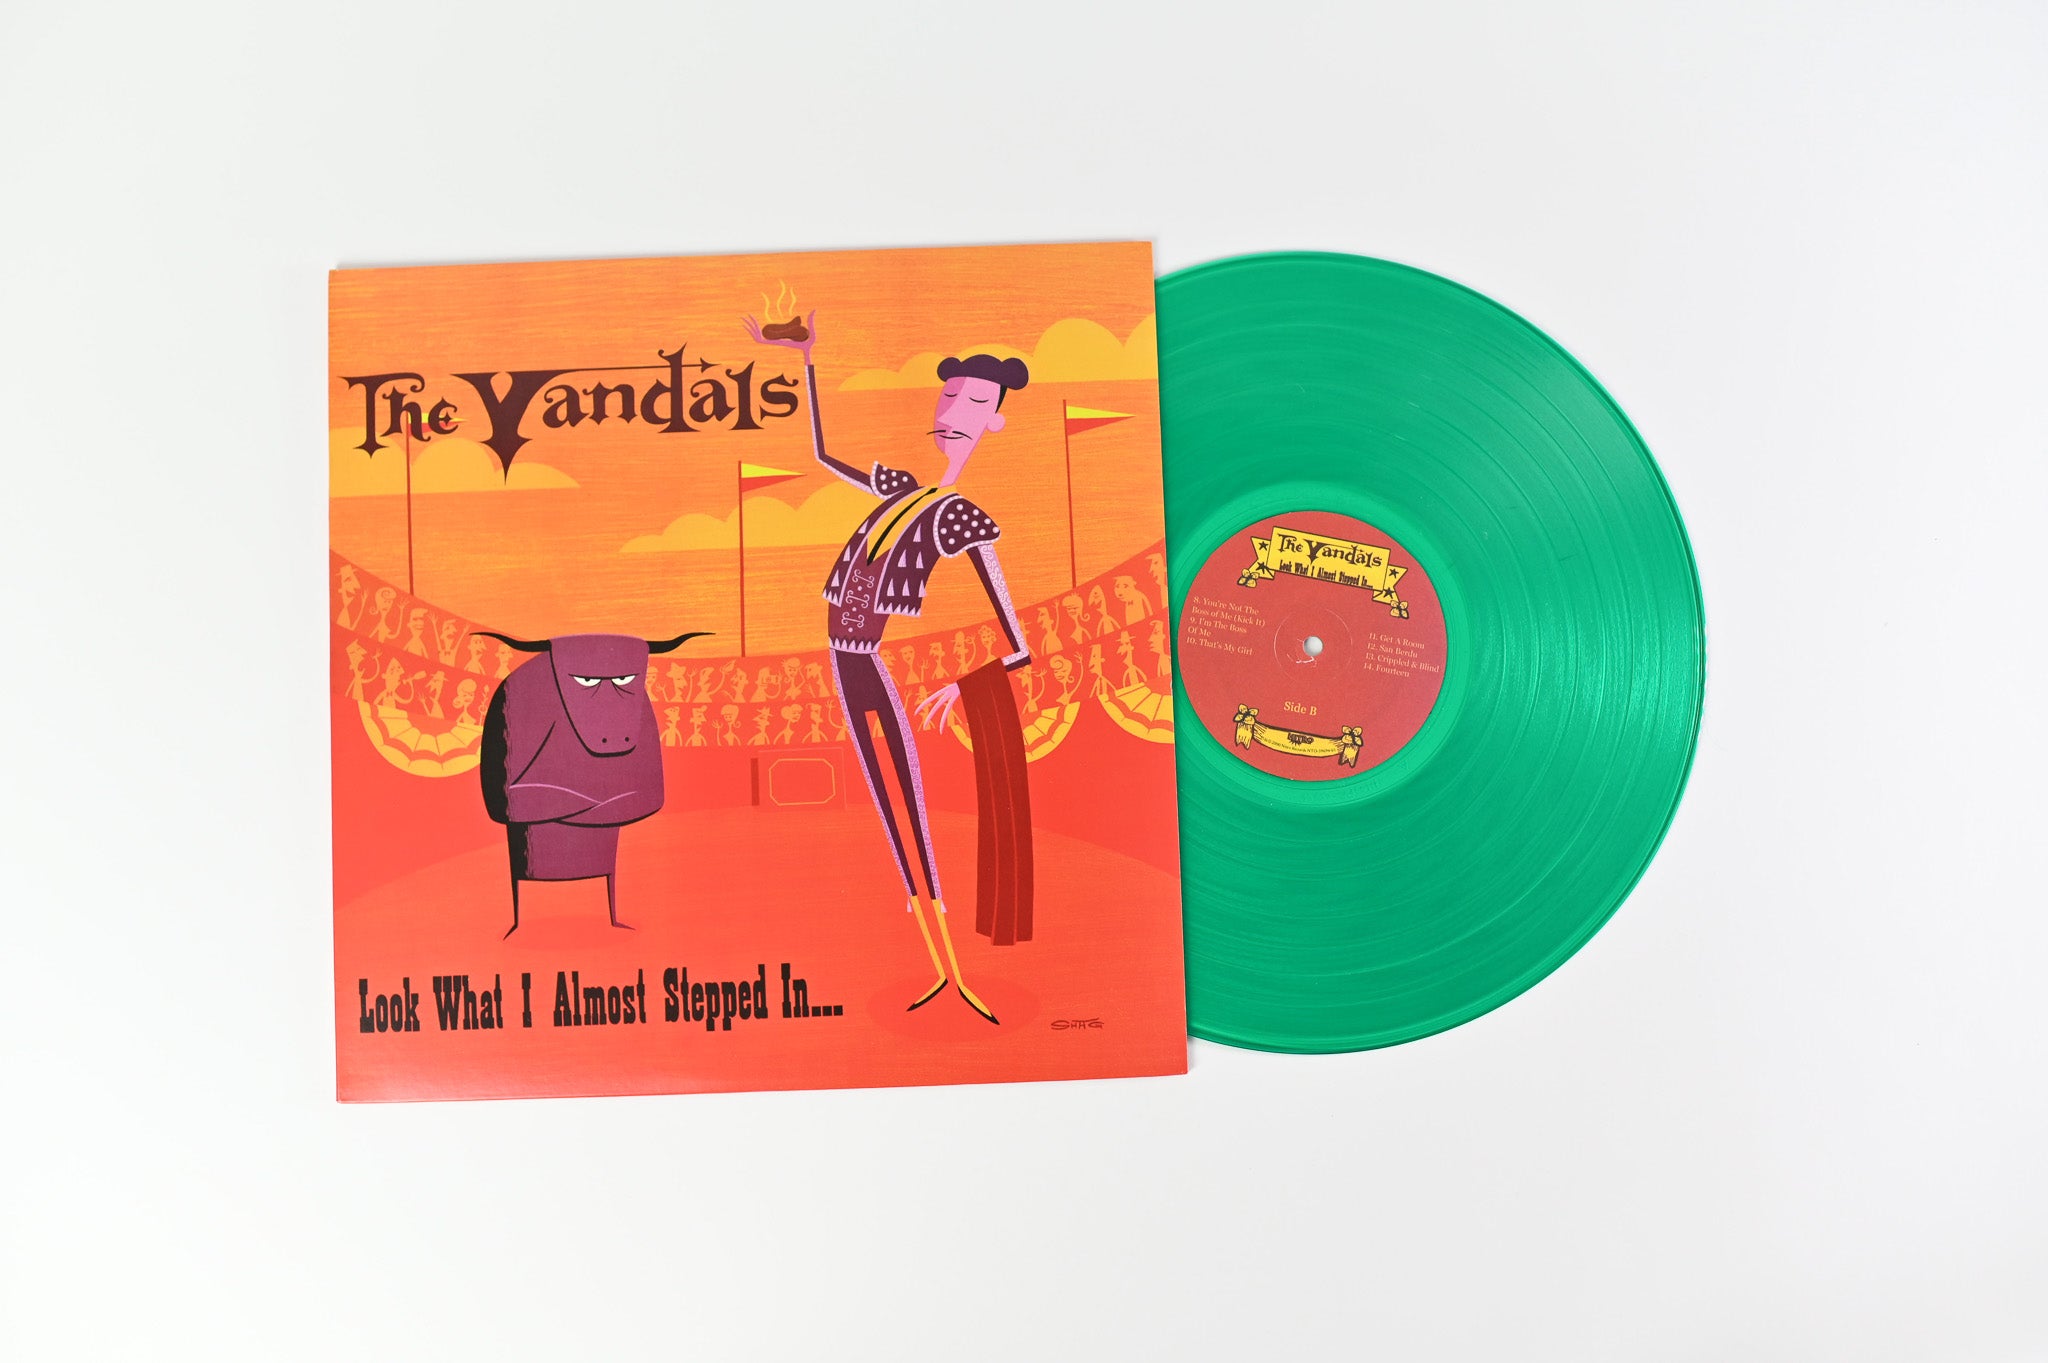 The Vandals - Look What I Almost Stepped In... on Nitro Records Green Transparent Vinyl